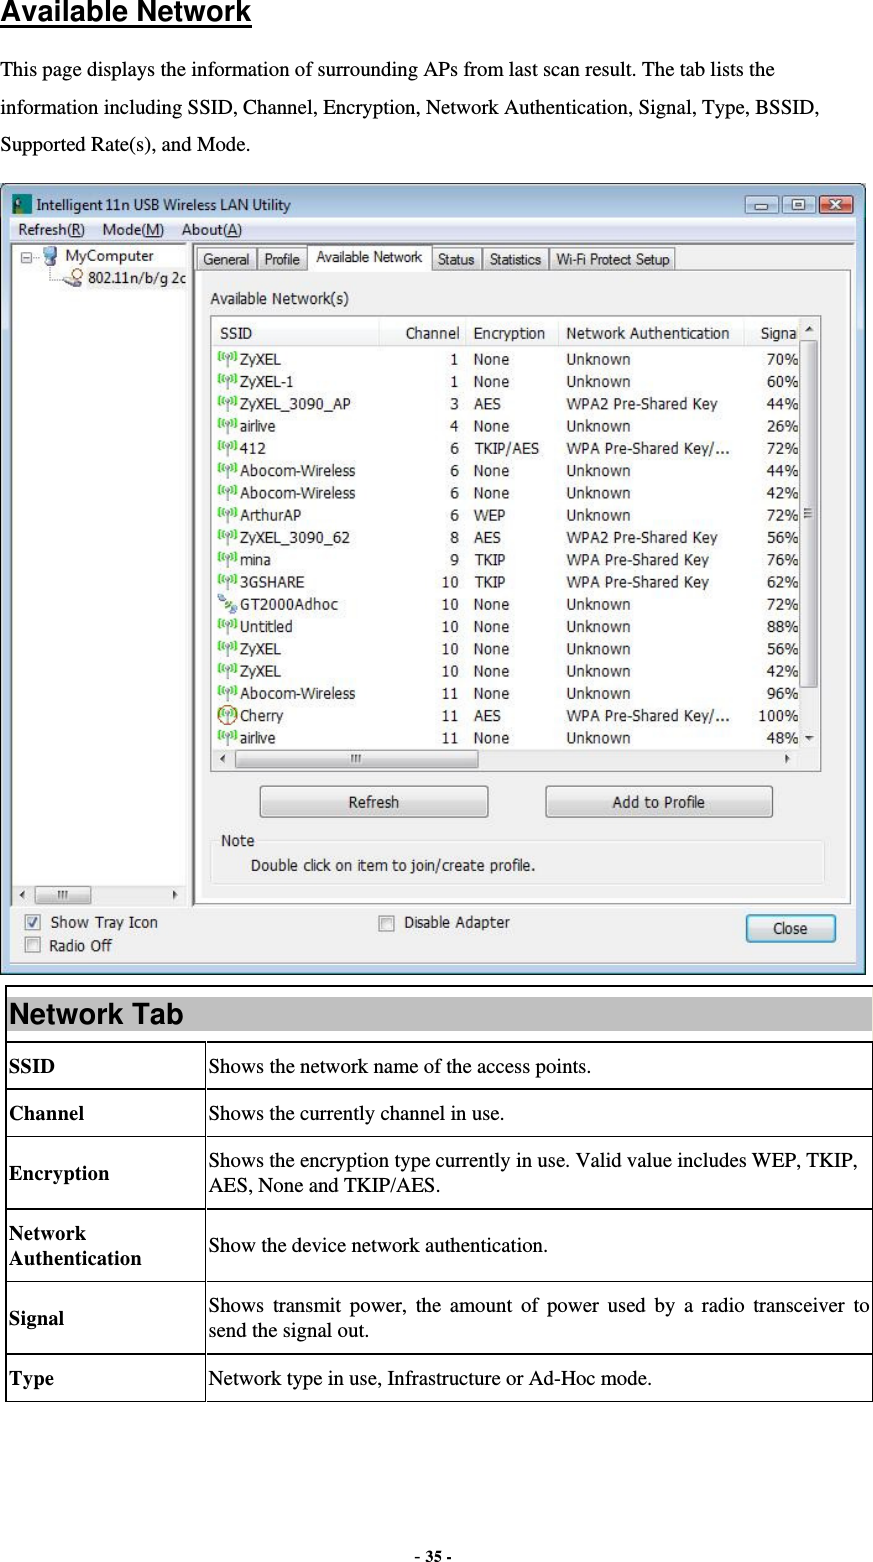  - 35 - Available Network This page displays the information of surrounding APs from last scan result. The tab lists the information including SSID, Channel, Encryption, Network Authentication, Signal, Type, BSSID, Supported Rate(s), and Mode.  Network Tab SSID  Shows the network name of the access points. Channel  Shows the currently channel in use. Encryption  Shows the encryption type currently in use. Valid value includes WEP, TKIP, AES, None and TKIP/AES. Network Authentication  Show the device network authentication. Signal  Shows transmit power, the amount of power used by a radio transceiver to send the signal out. Type Network type in use, Infrastructure or Ad-Hoc mode. 